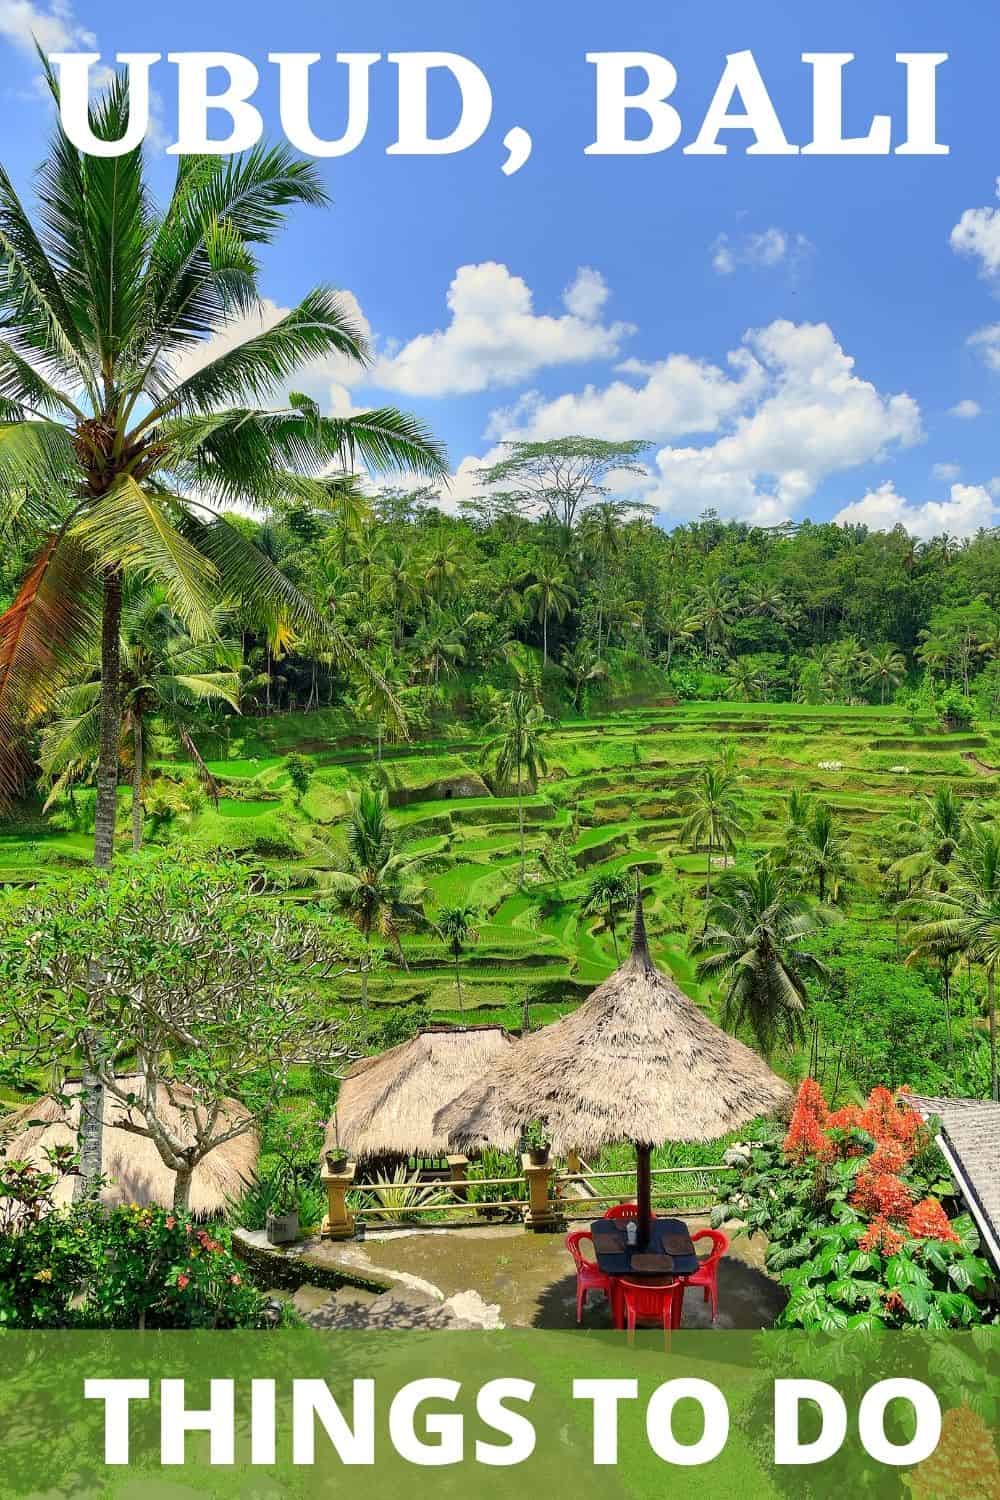 Is Bali on your bucket list? If so, you'll appreciate this list of things to do in Ubud. From temples to a sacred monkey forest sanctuary. #Bali #Ubud